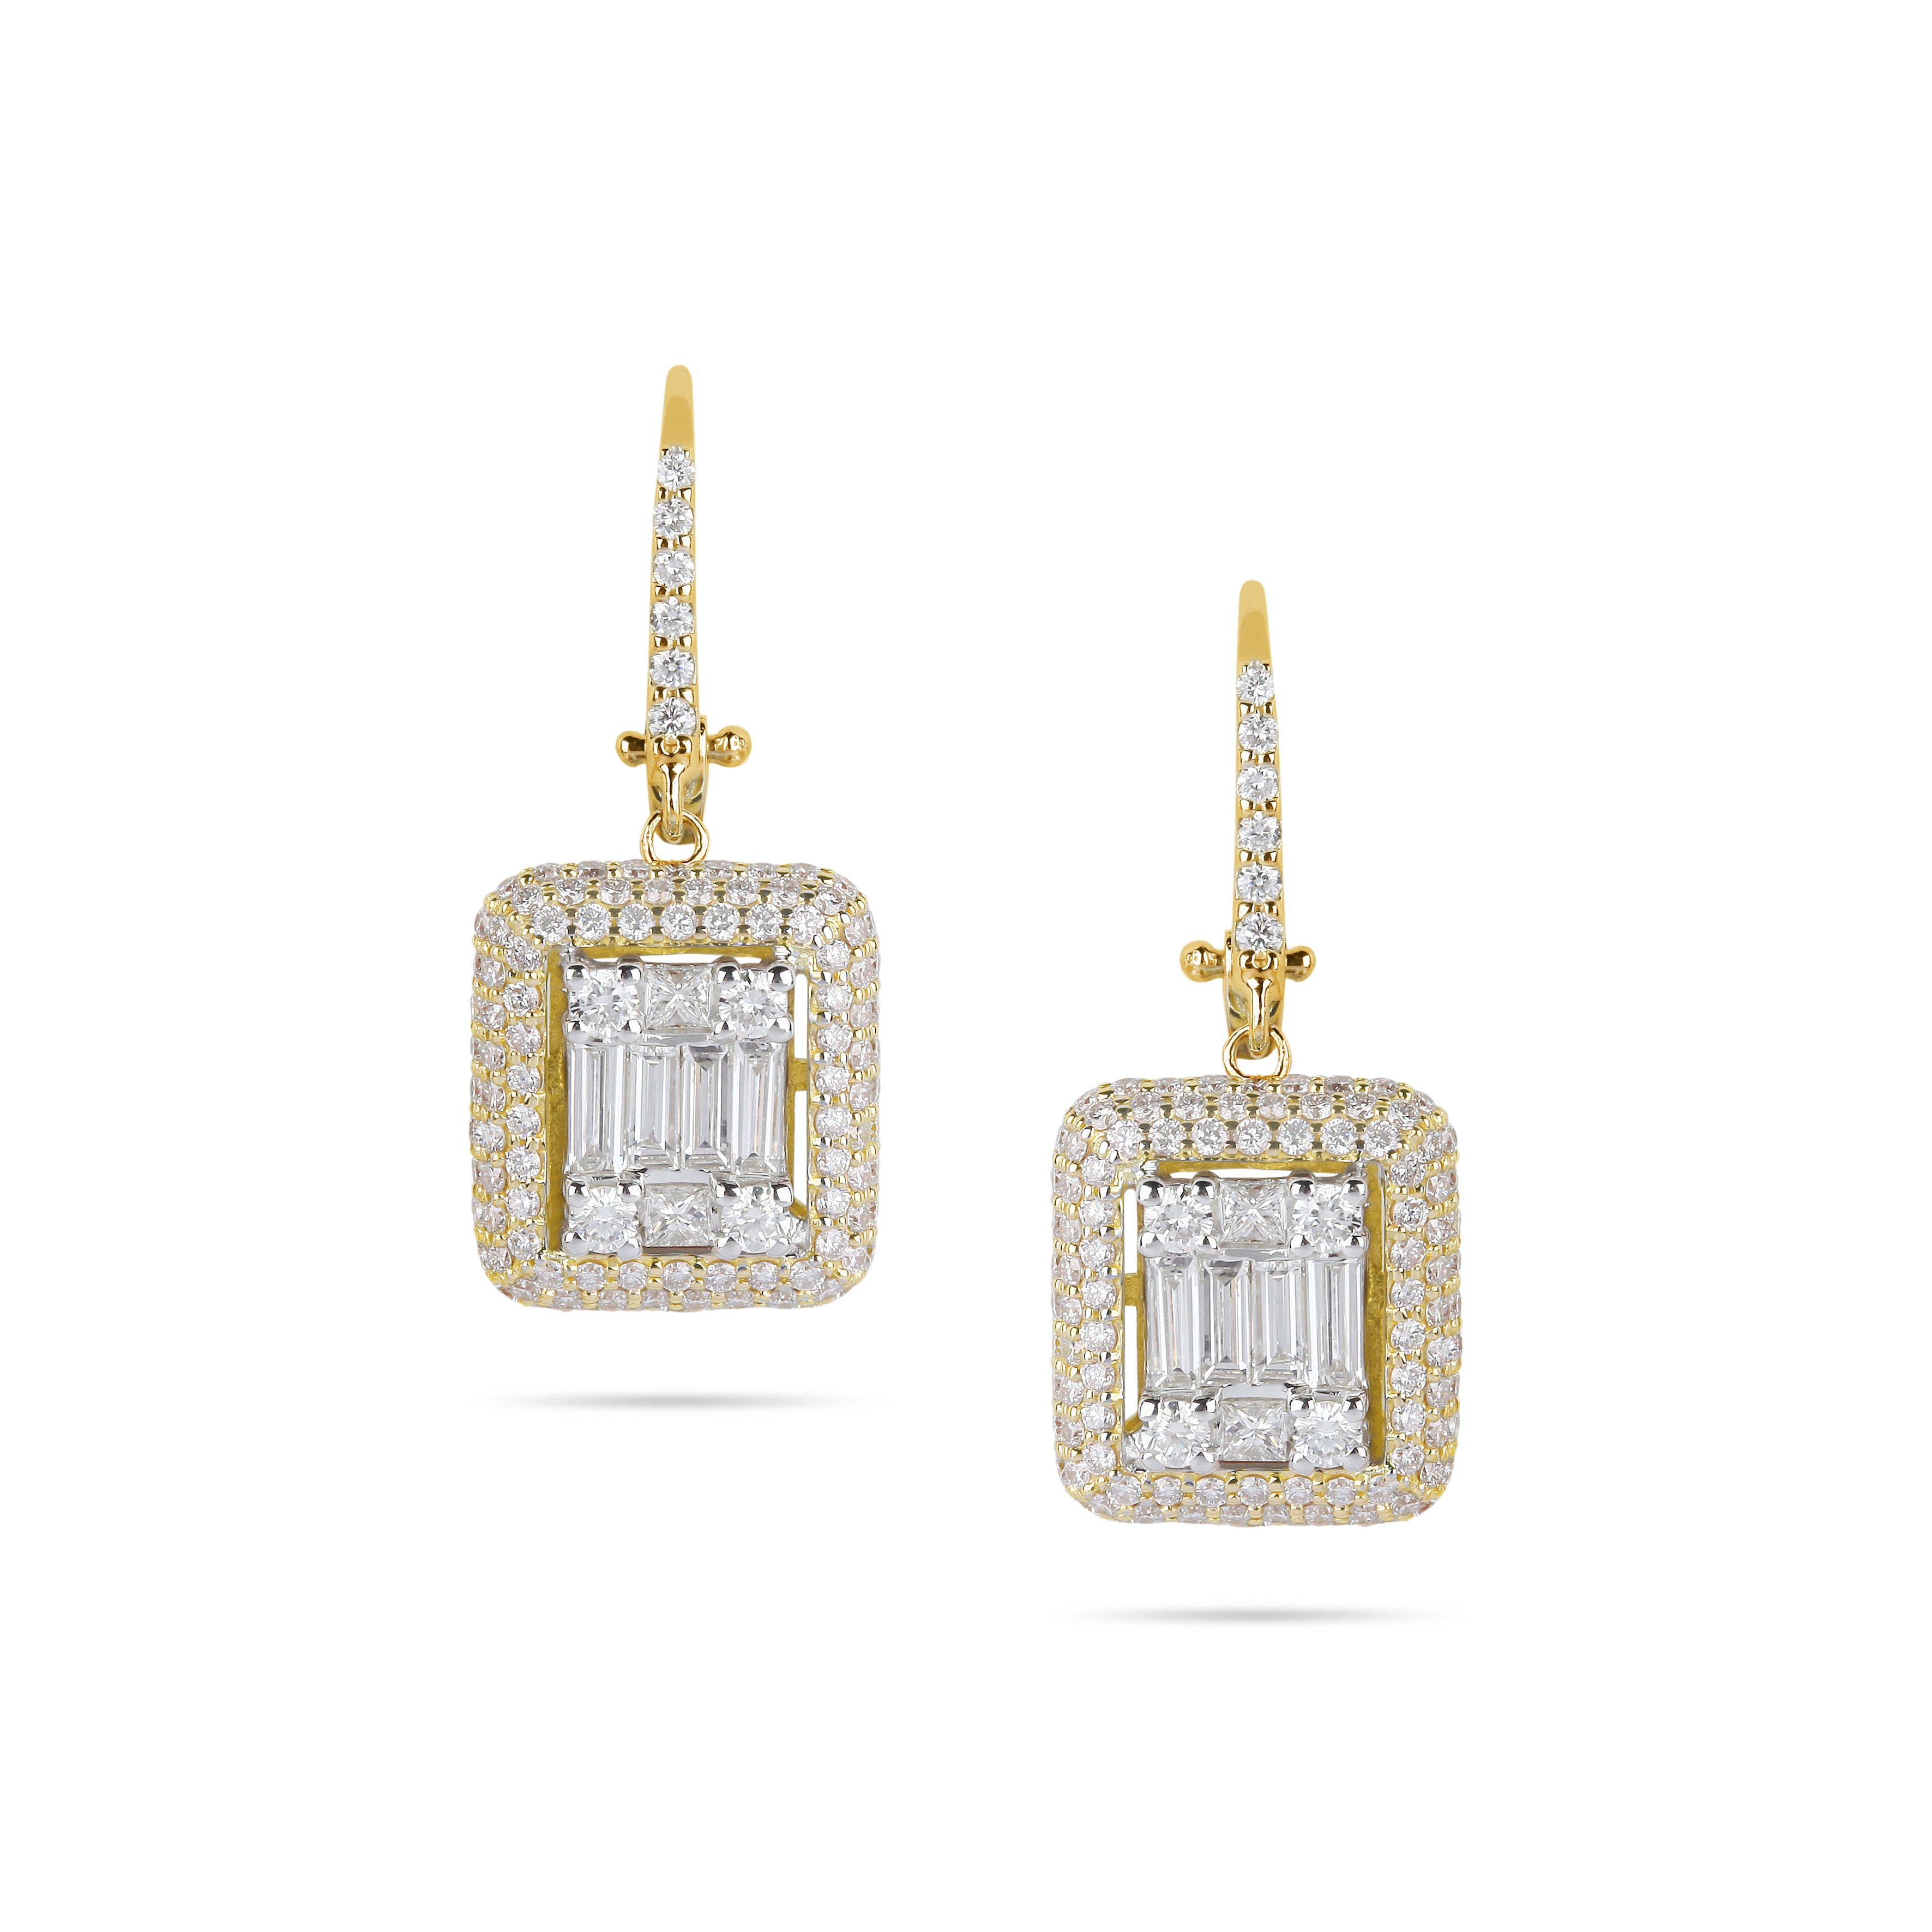 Buy 0.10 Carat (ctw) 18K Yellow Gold Round White Diamond Ladies Solitaire Stud  Earrings Online at Dazzling Rock